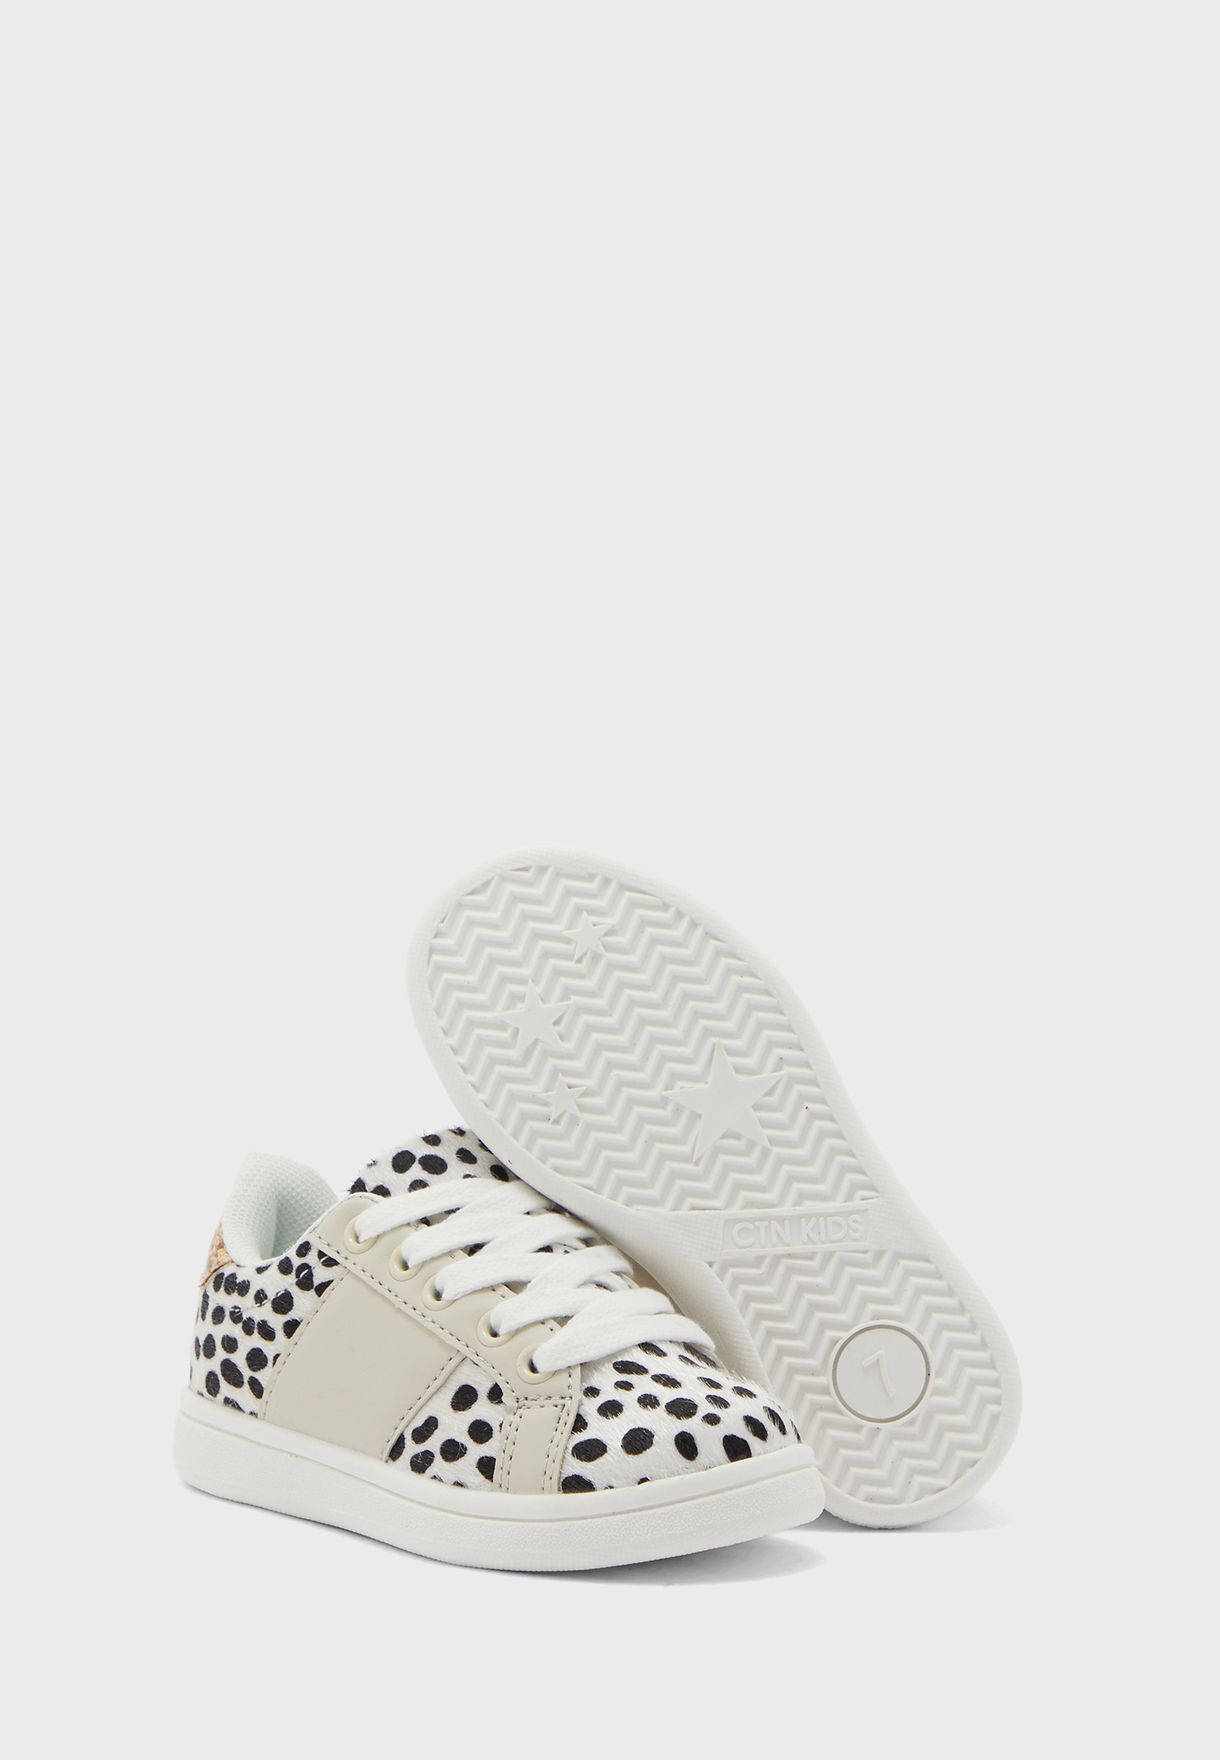 adidas snow leopard sneakers